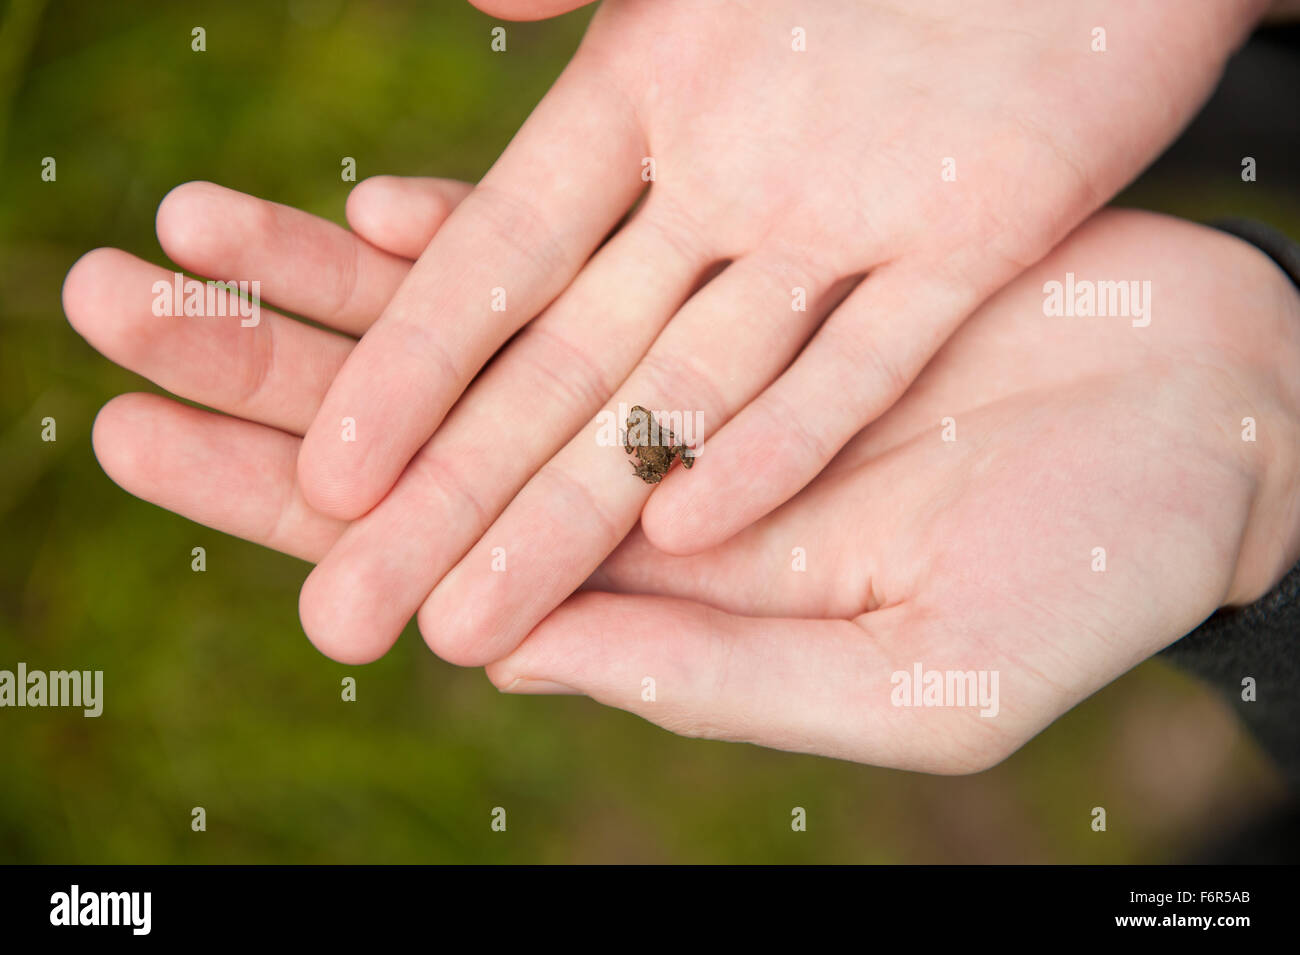 Man holding tiny frog on hand, caught one very little brown animal lying alive on human fingers closeup, horizontal orientation Stock Photo